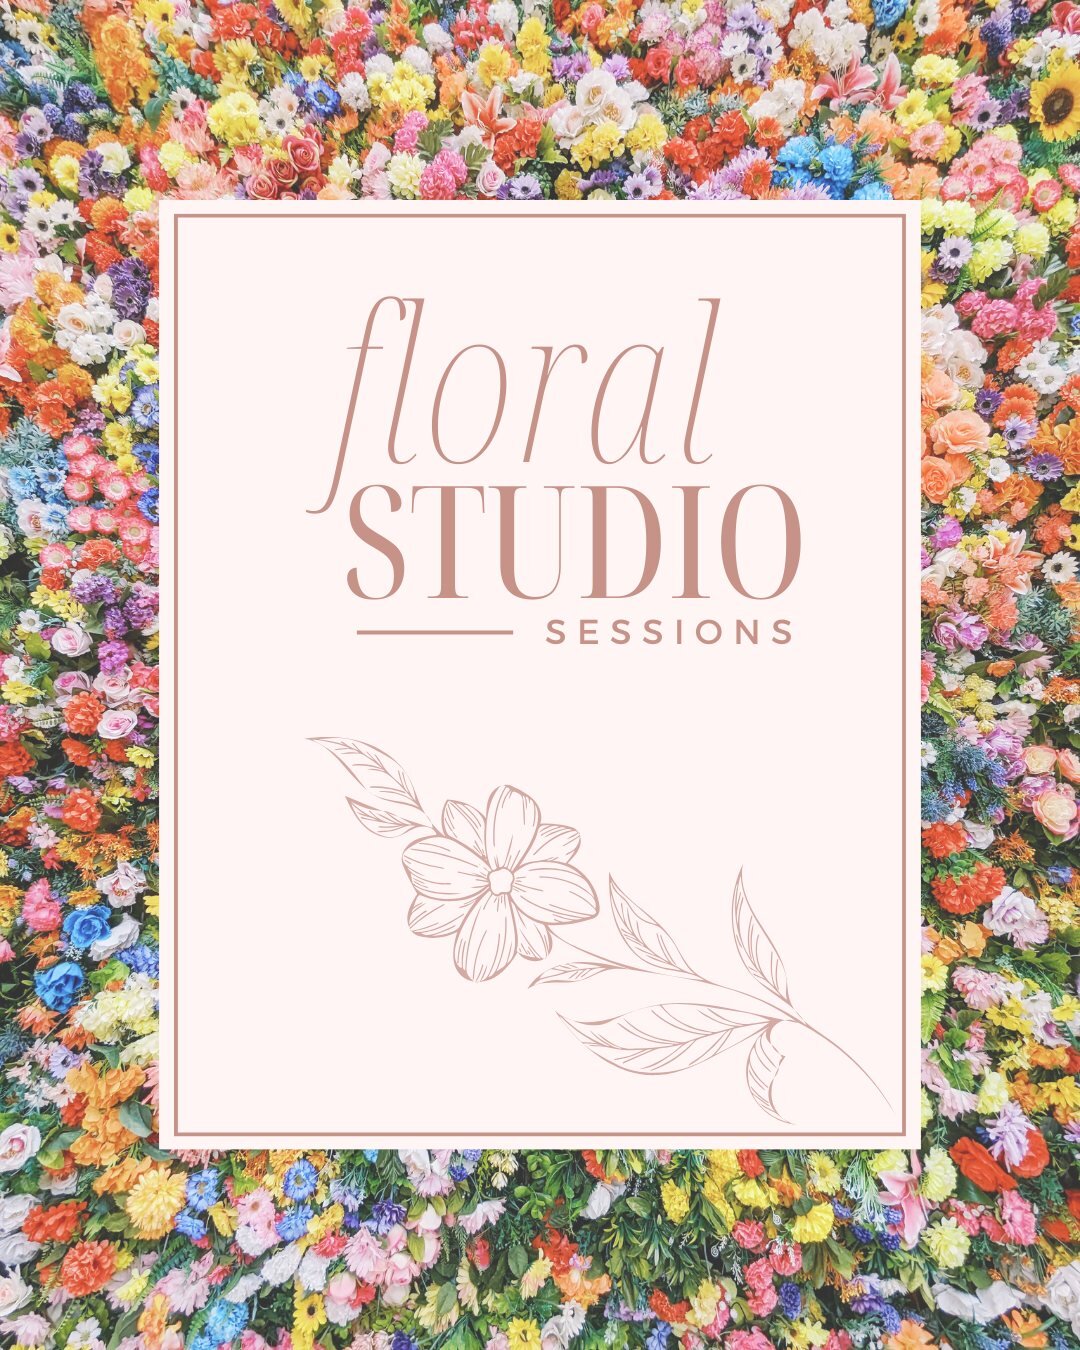 NOW BOOKING floral studio sessions! A perfect gift for Mother's Day or simply because moments with your loved ones are worth remembering.

Combining my love for all things floral and colourful with my love for documenting your beautiful stories I&rsq